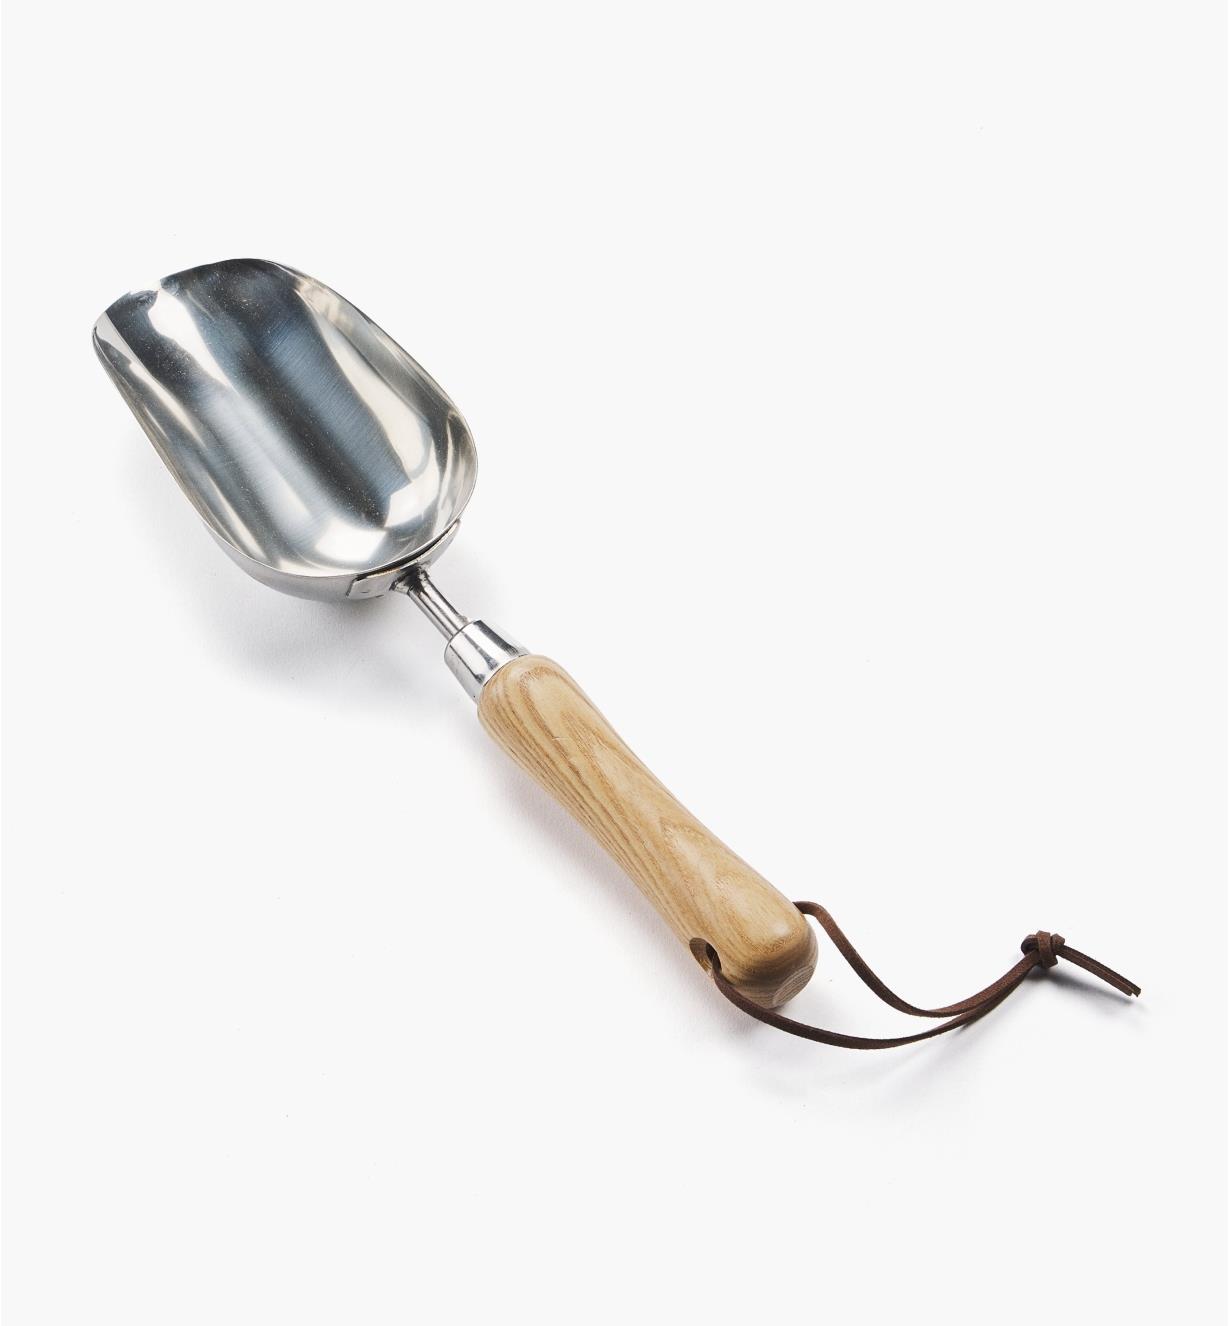 AD523 - Stainless-Steel Scoop